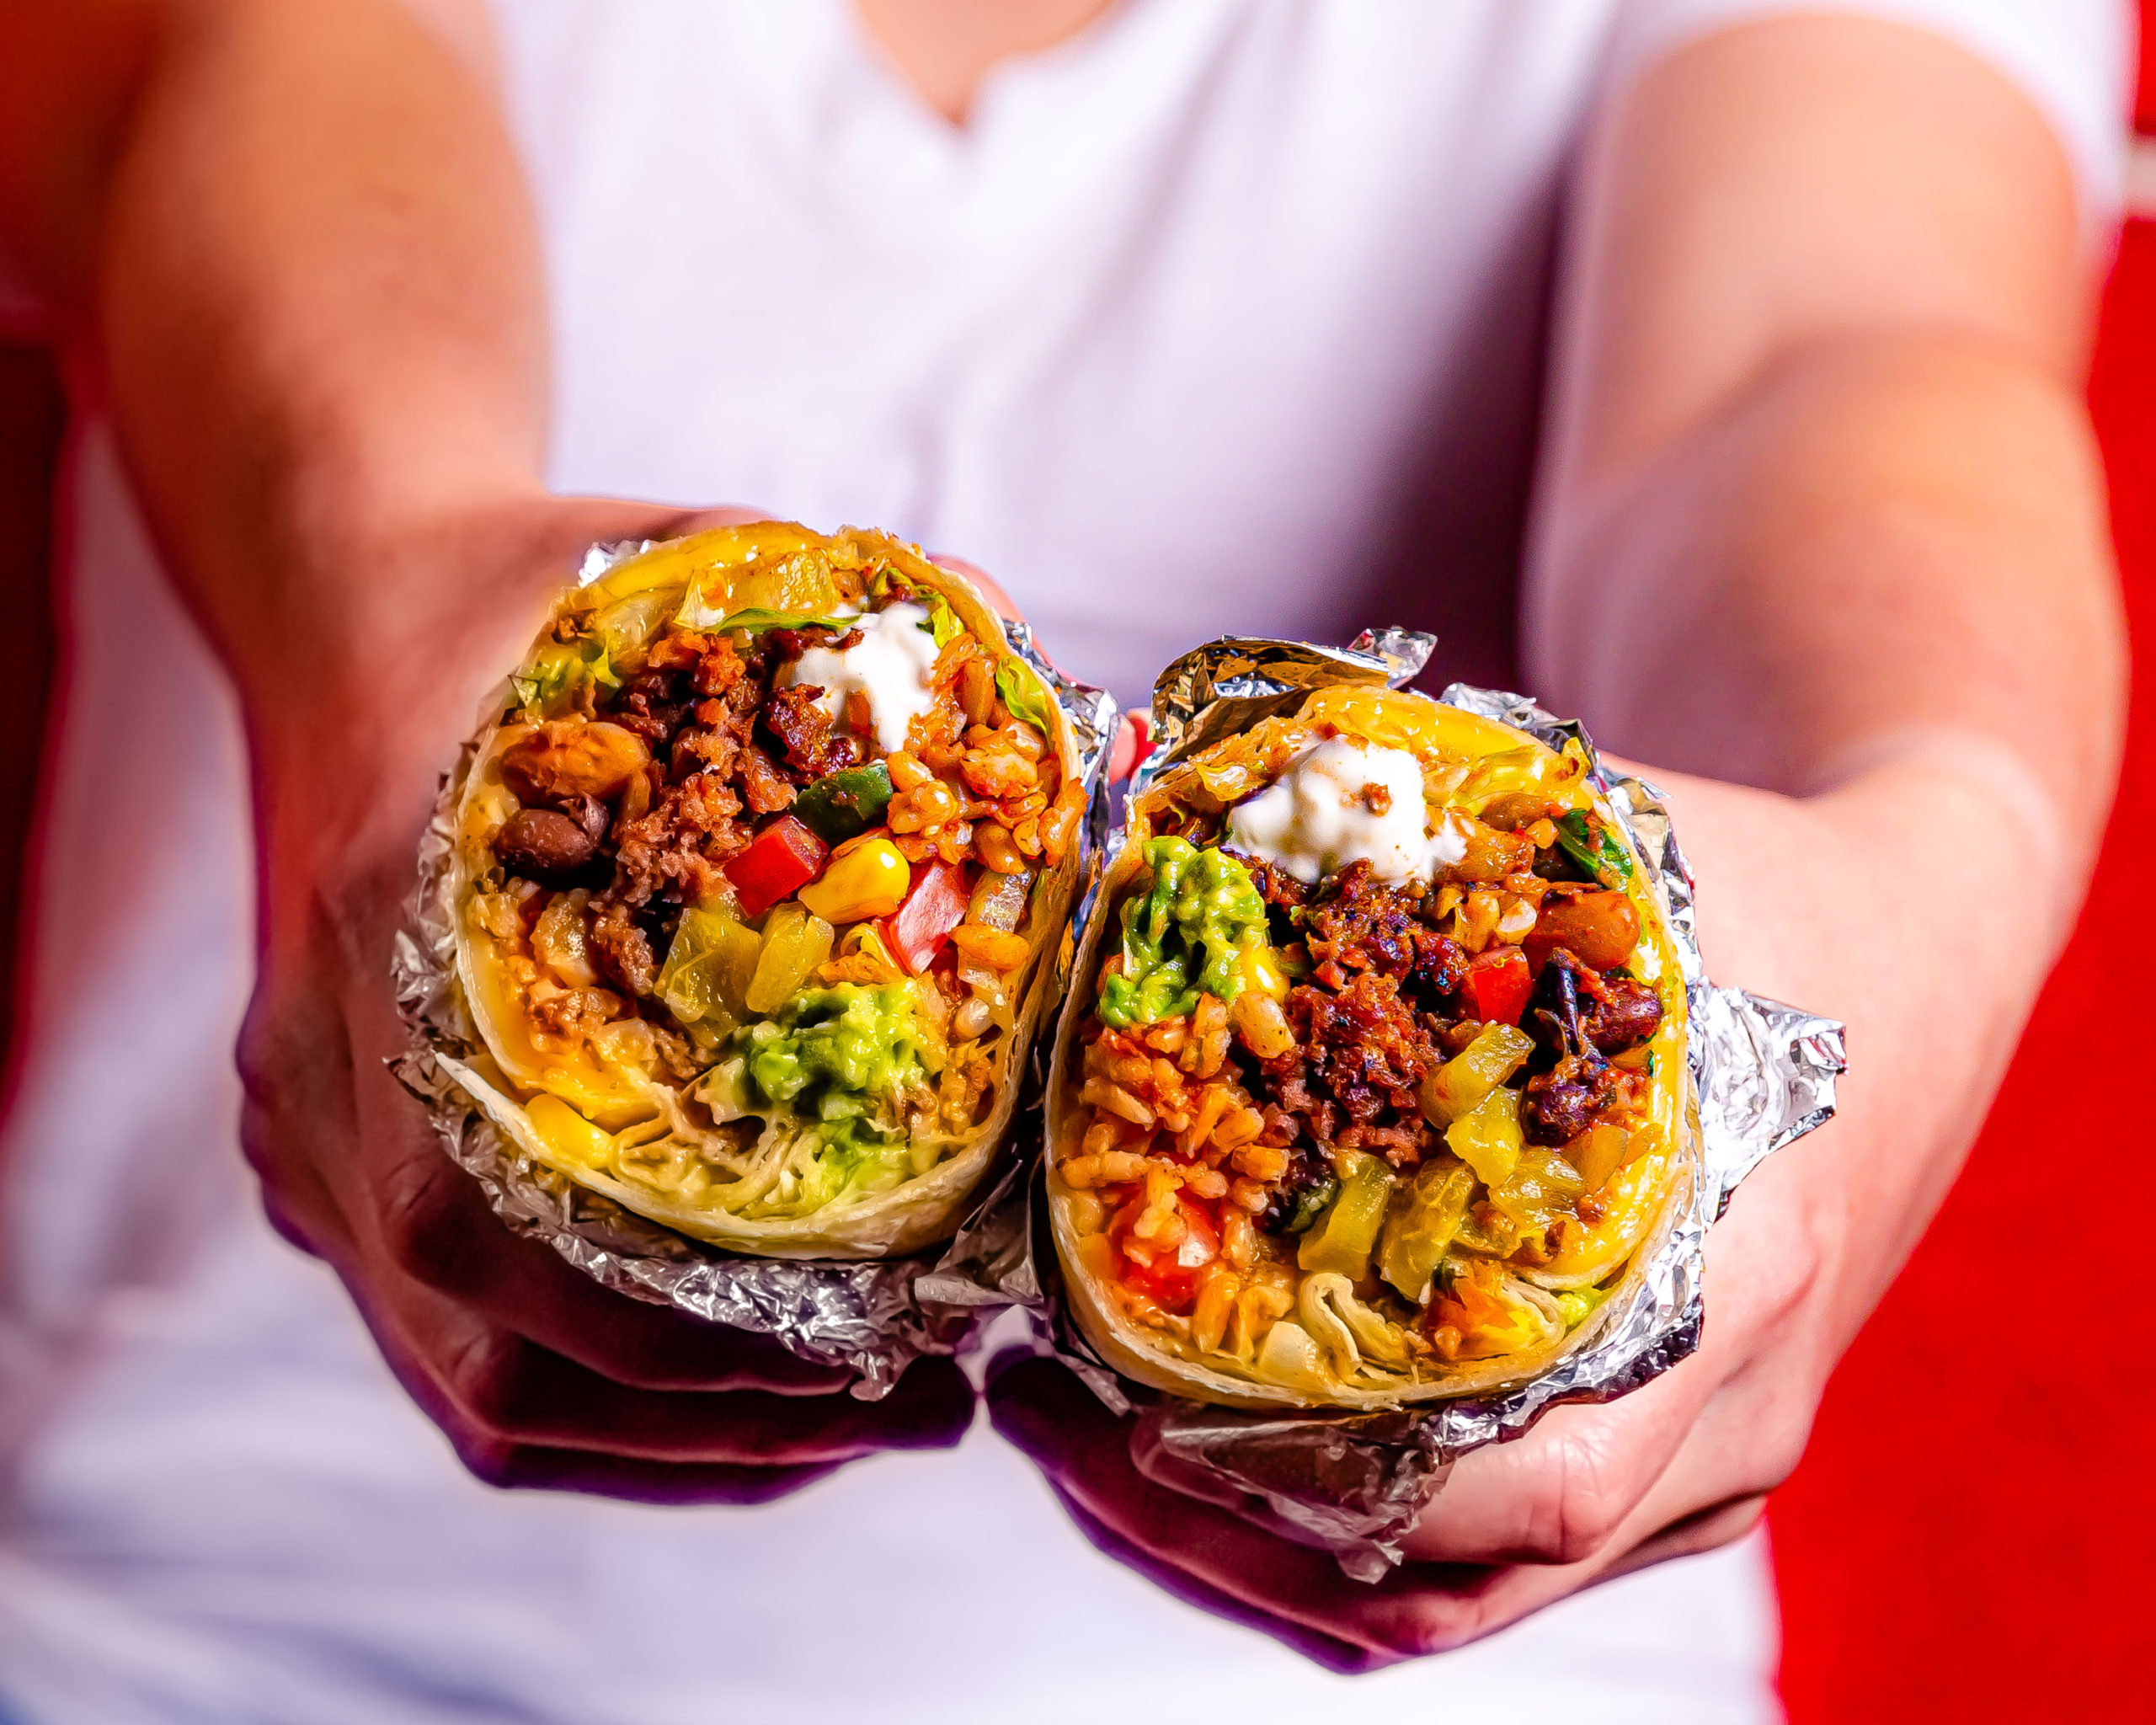 Más Veggies Vegan Taqueria Launches New Loaded Burrito That Weighs Over A Pound